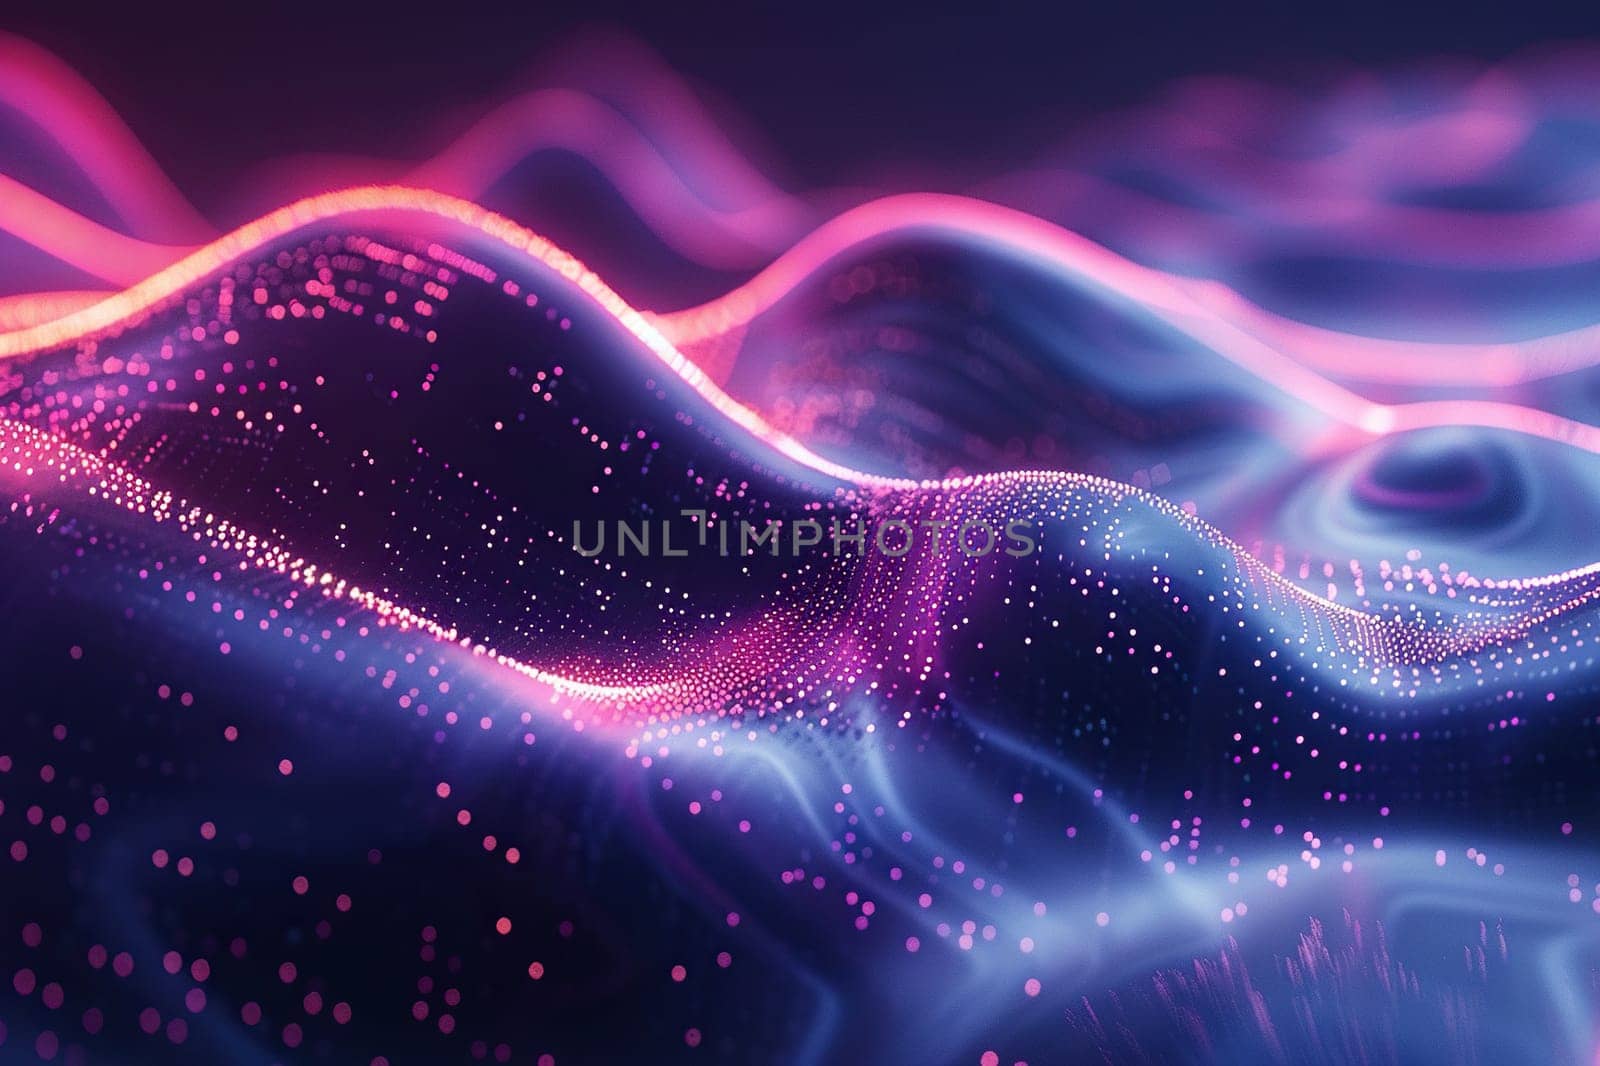 Abstract background with an image of a neon sound wave in the dark.